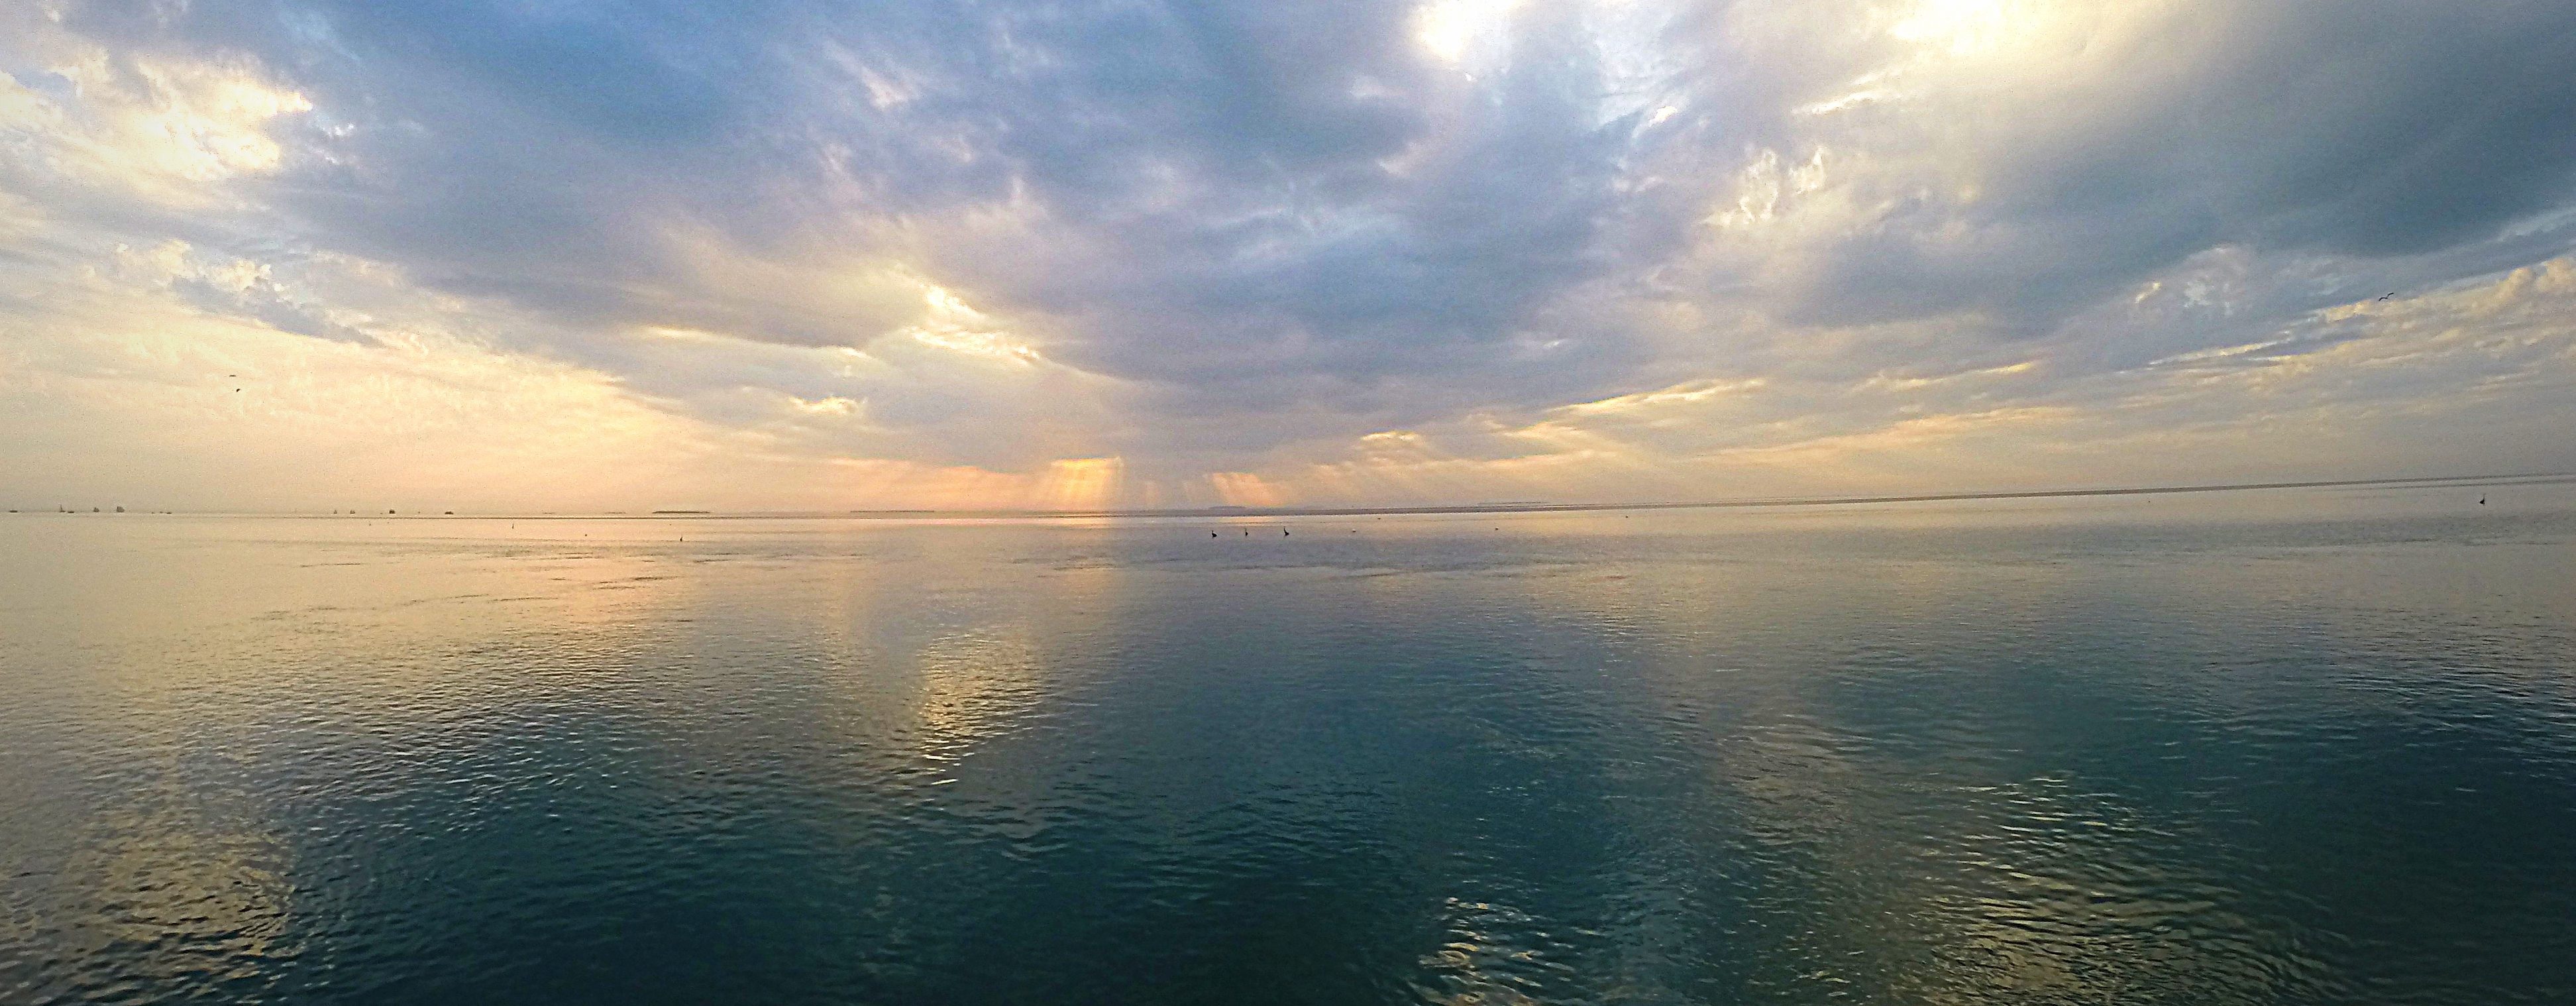 a colorful cloudy afternoon sky meets with the calm backcountry water off of key west